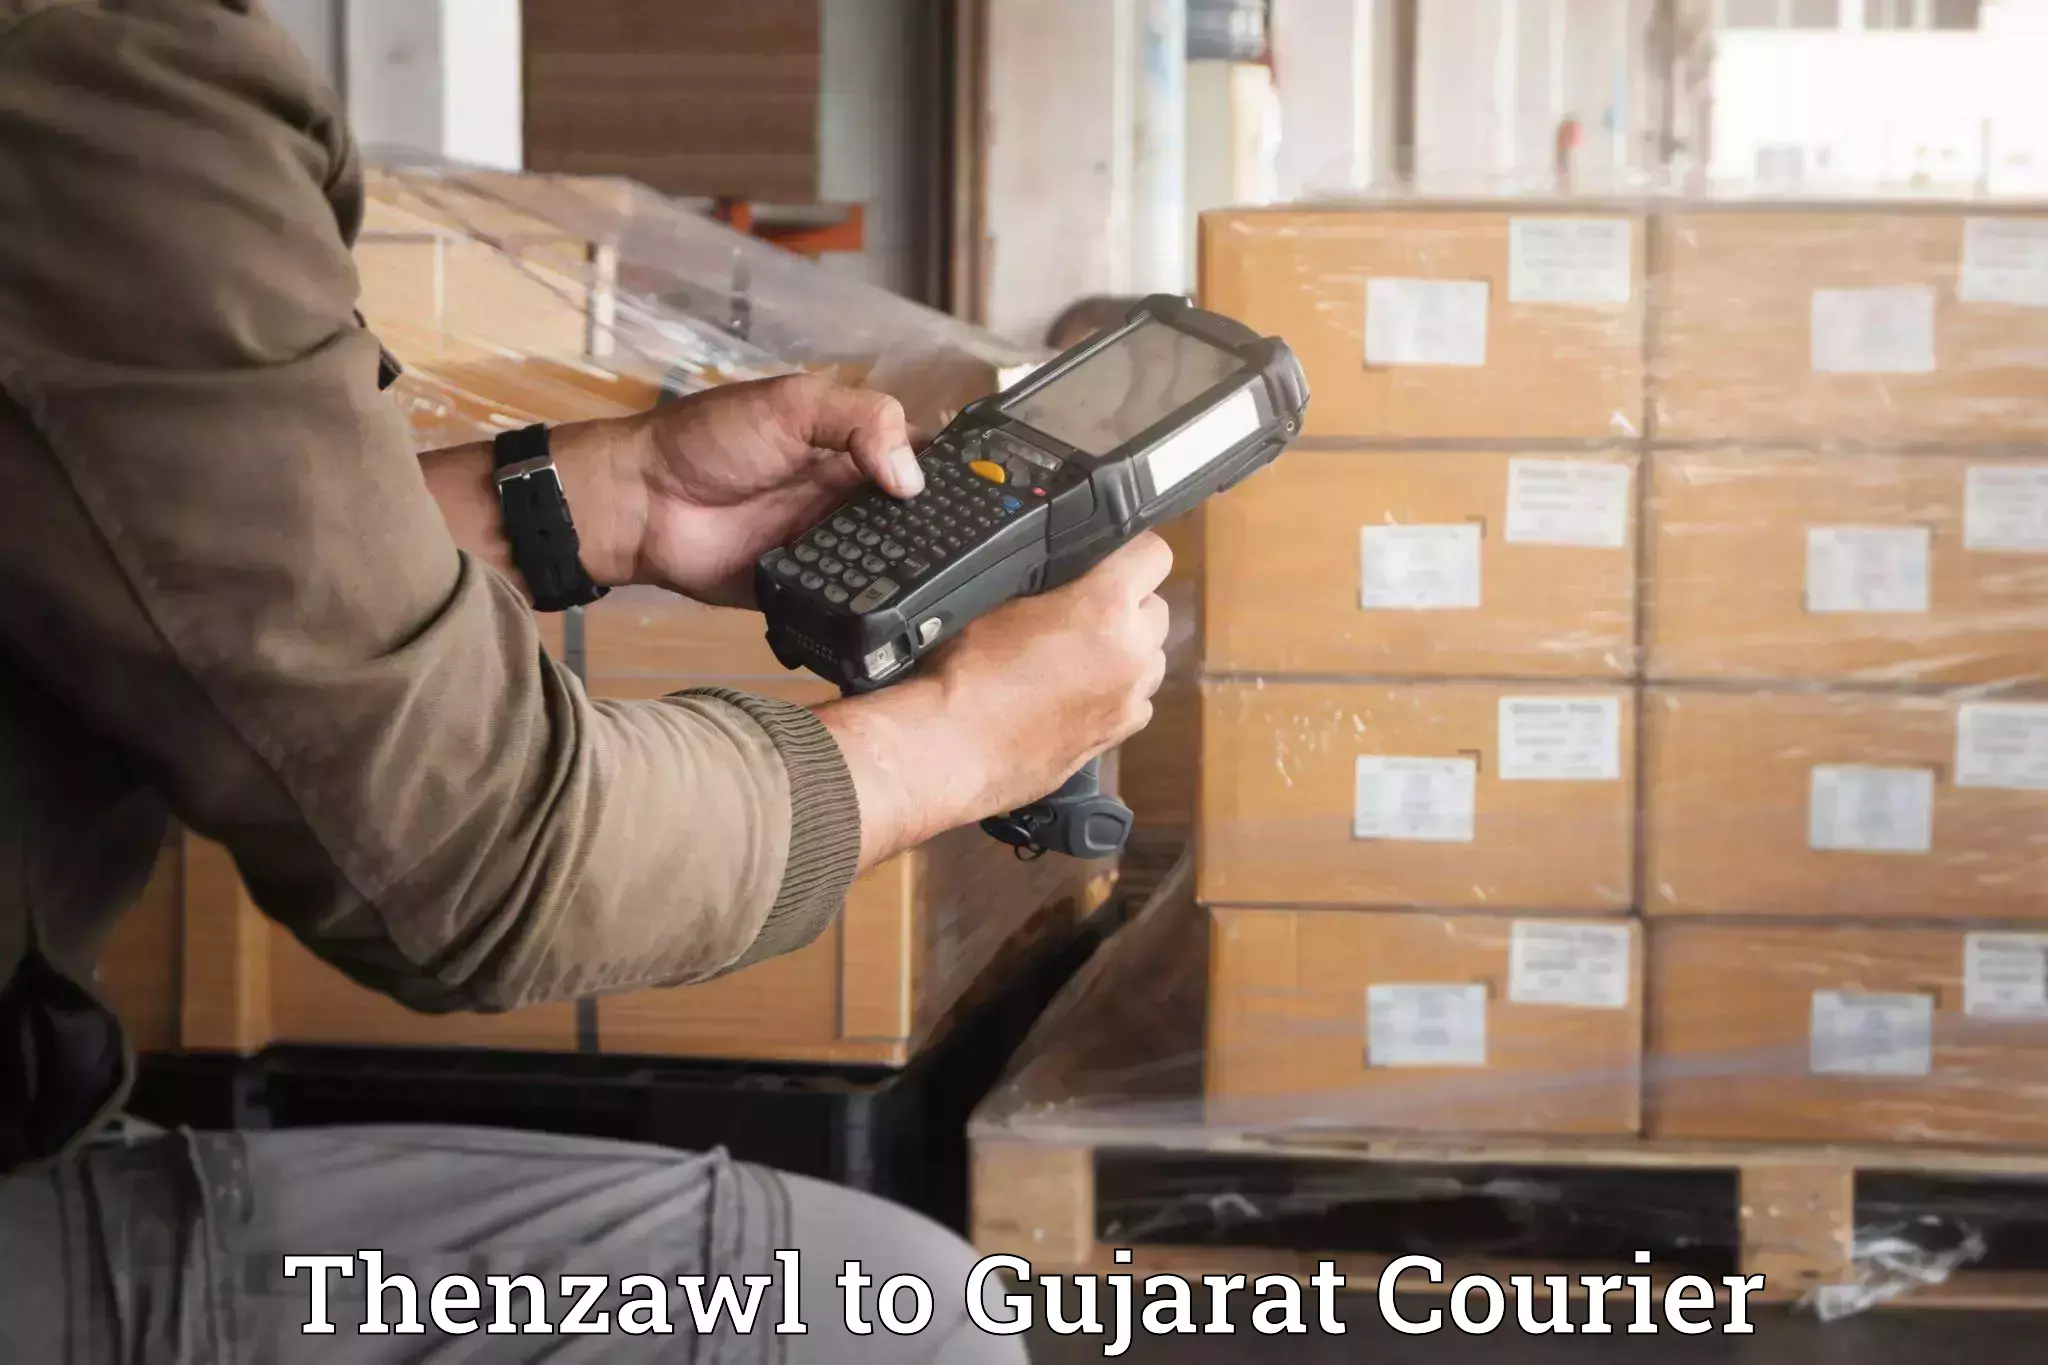 Furniture delivery service Thenzawl to Gujarat